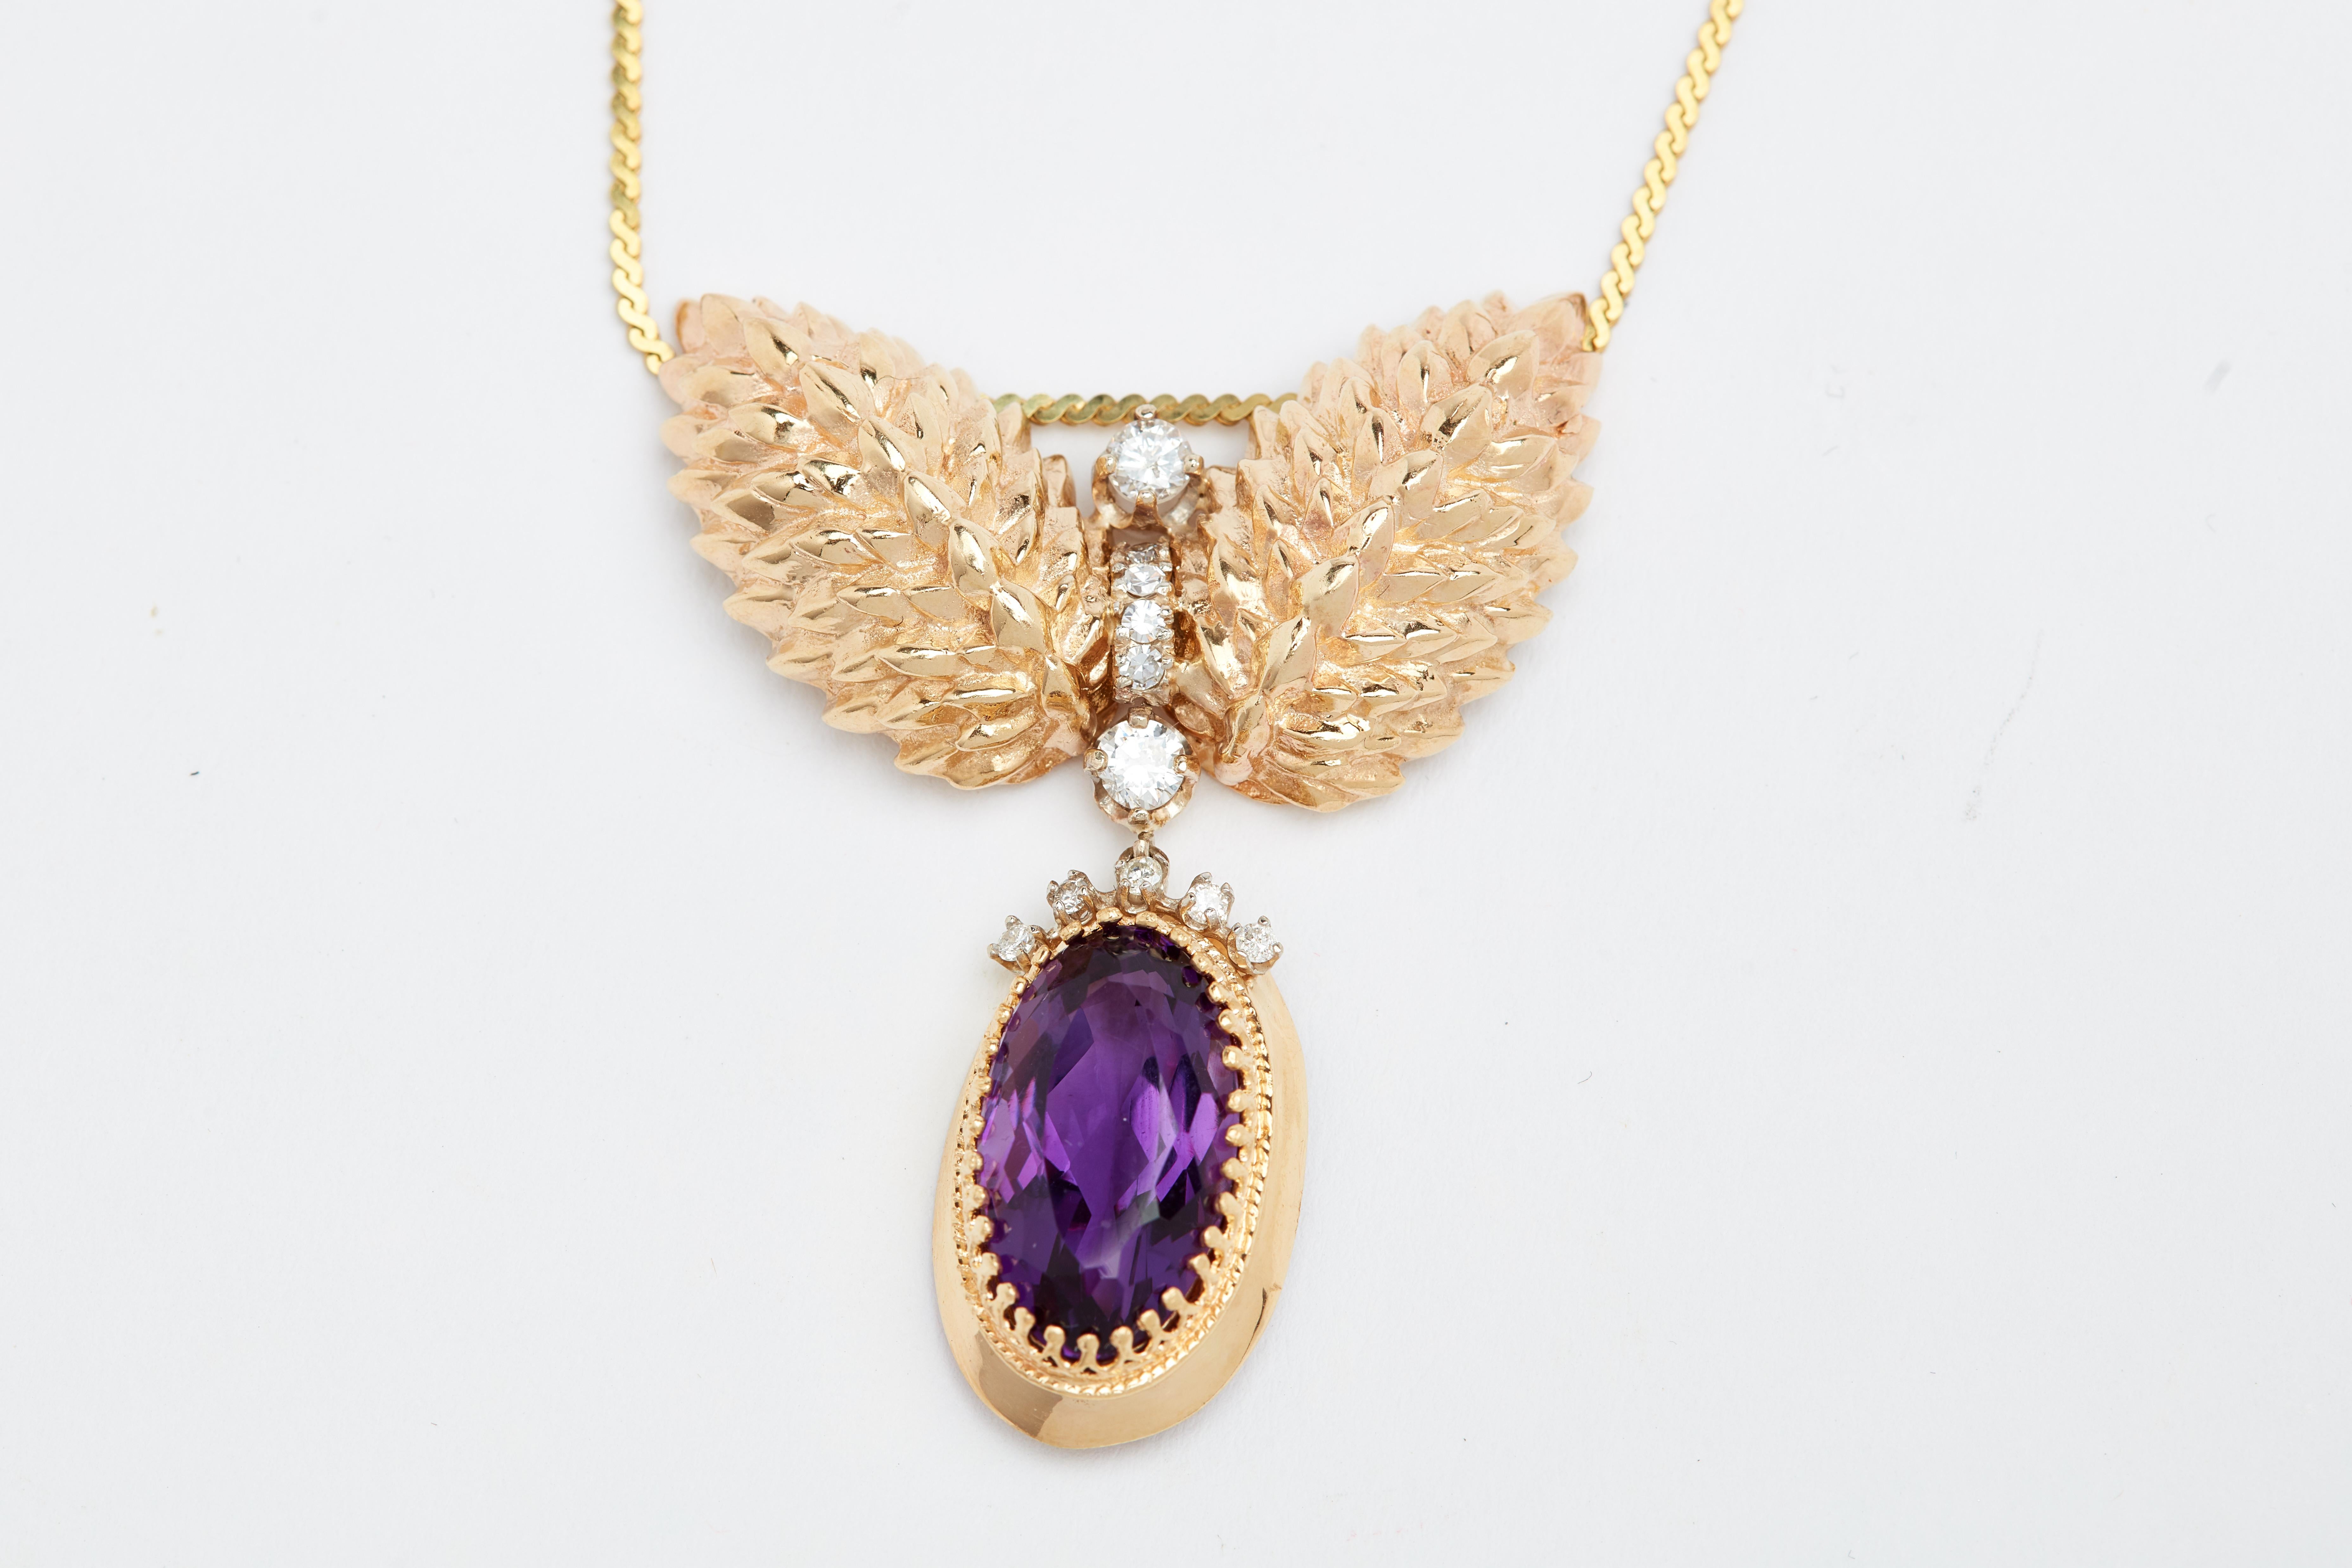 Oval Cut Large Oval Amethysts and Diamond Pendant Necklace with Chain